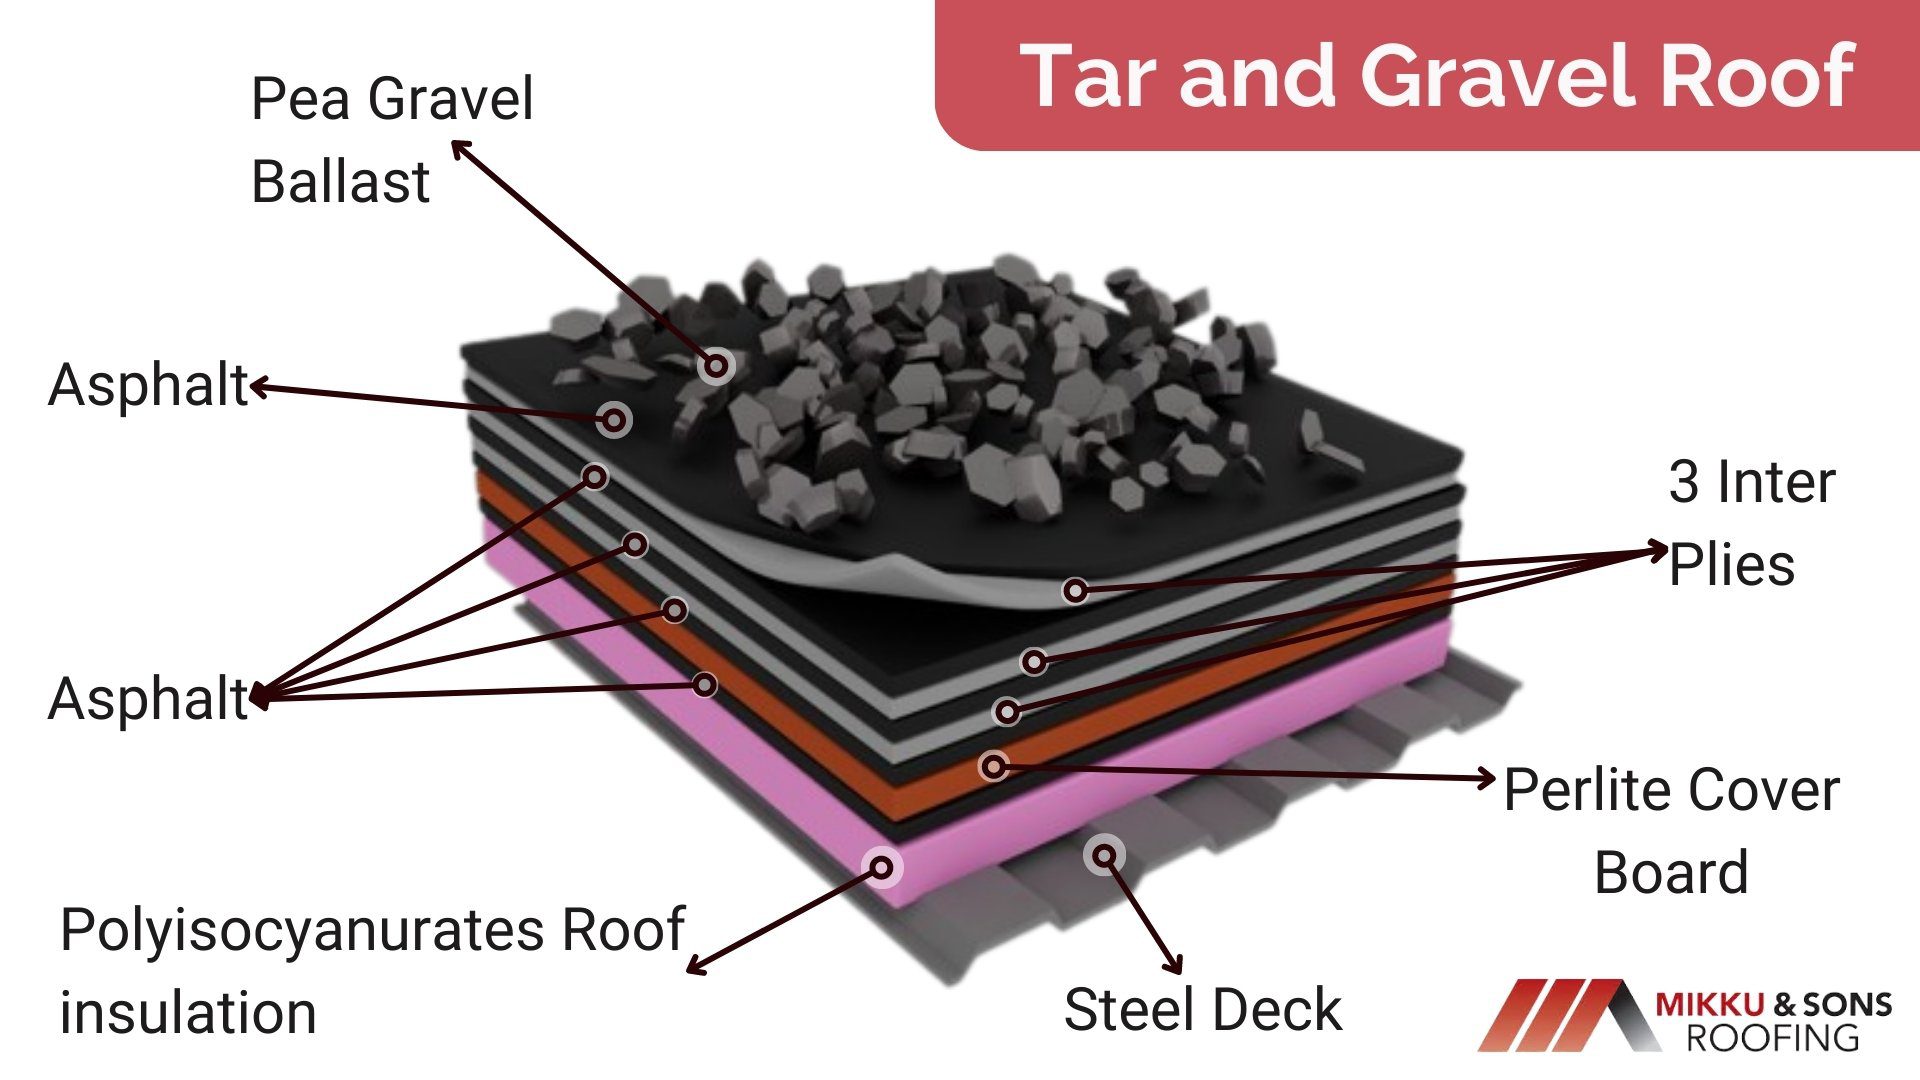 3d model showing tar and gravel roof layers for tar and gravel roof guide for beginners